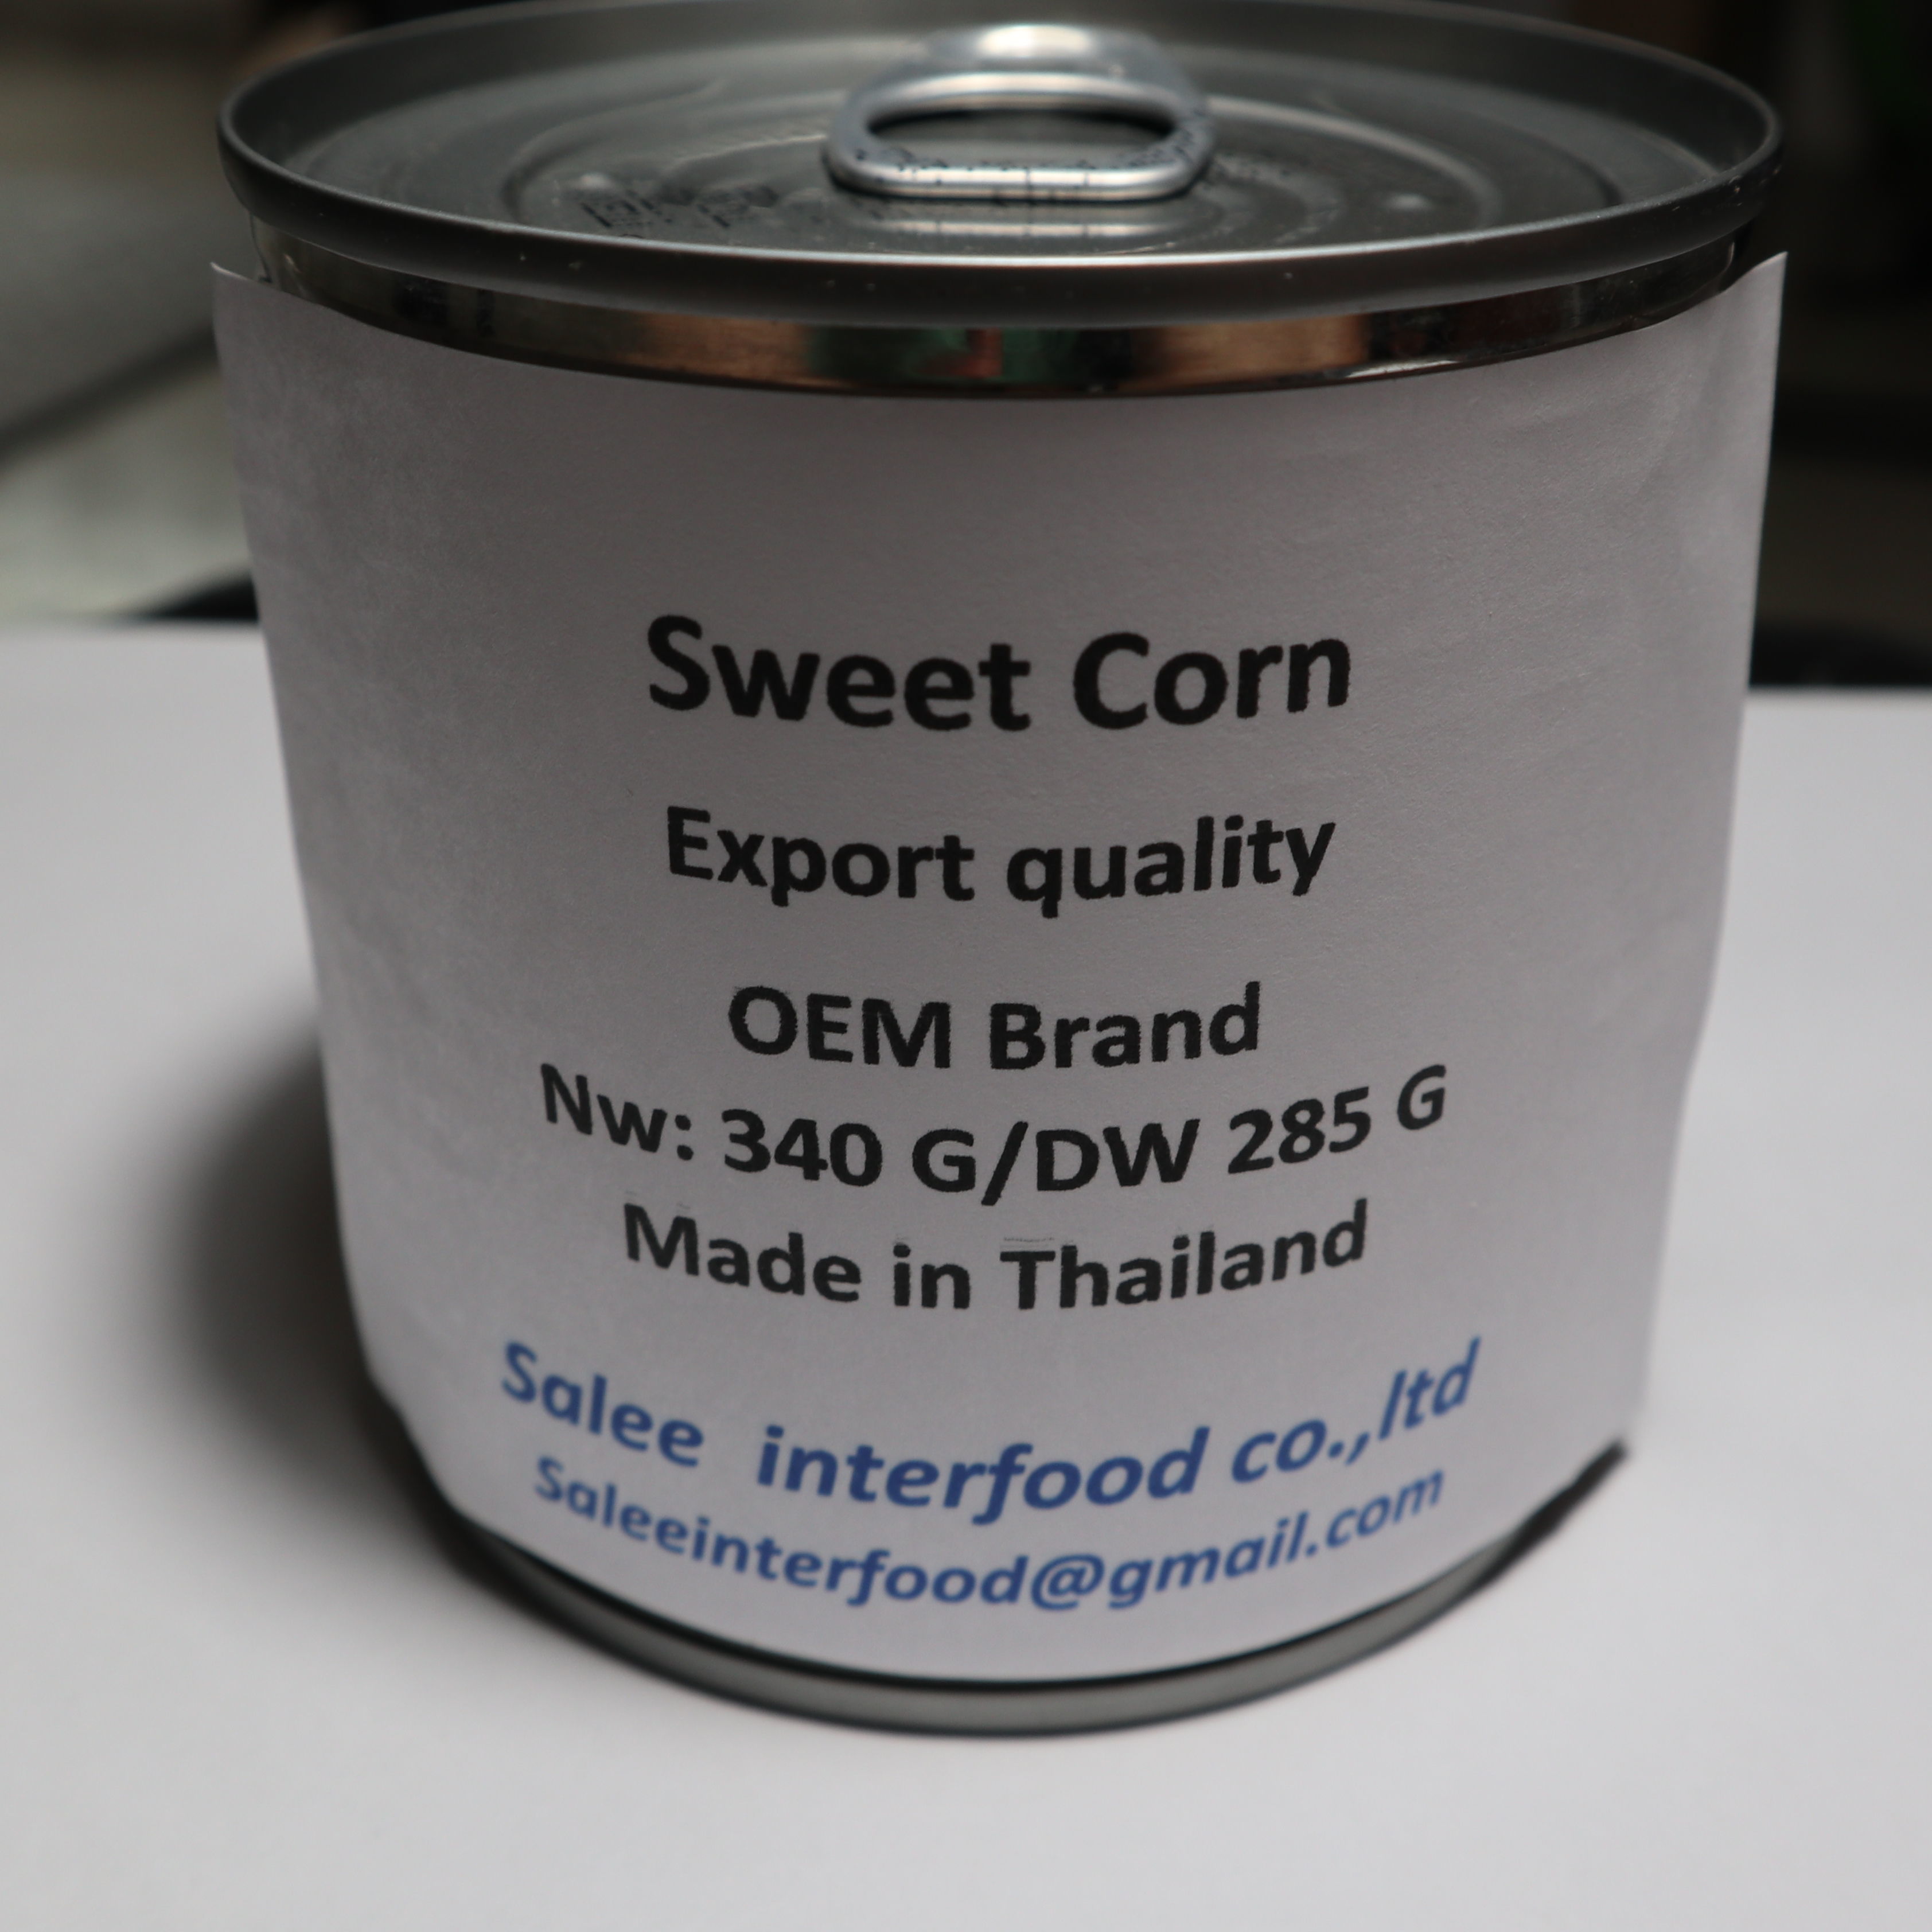 Sweet corn export quality from thailand